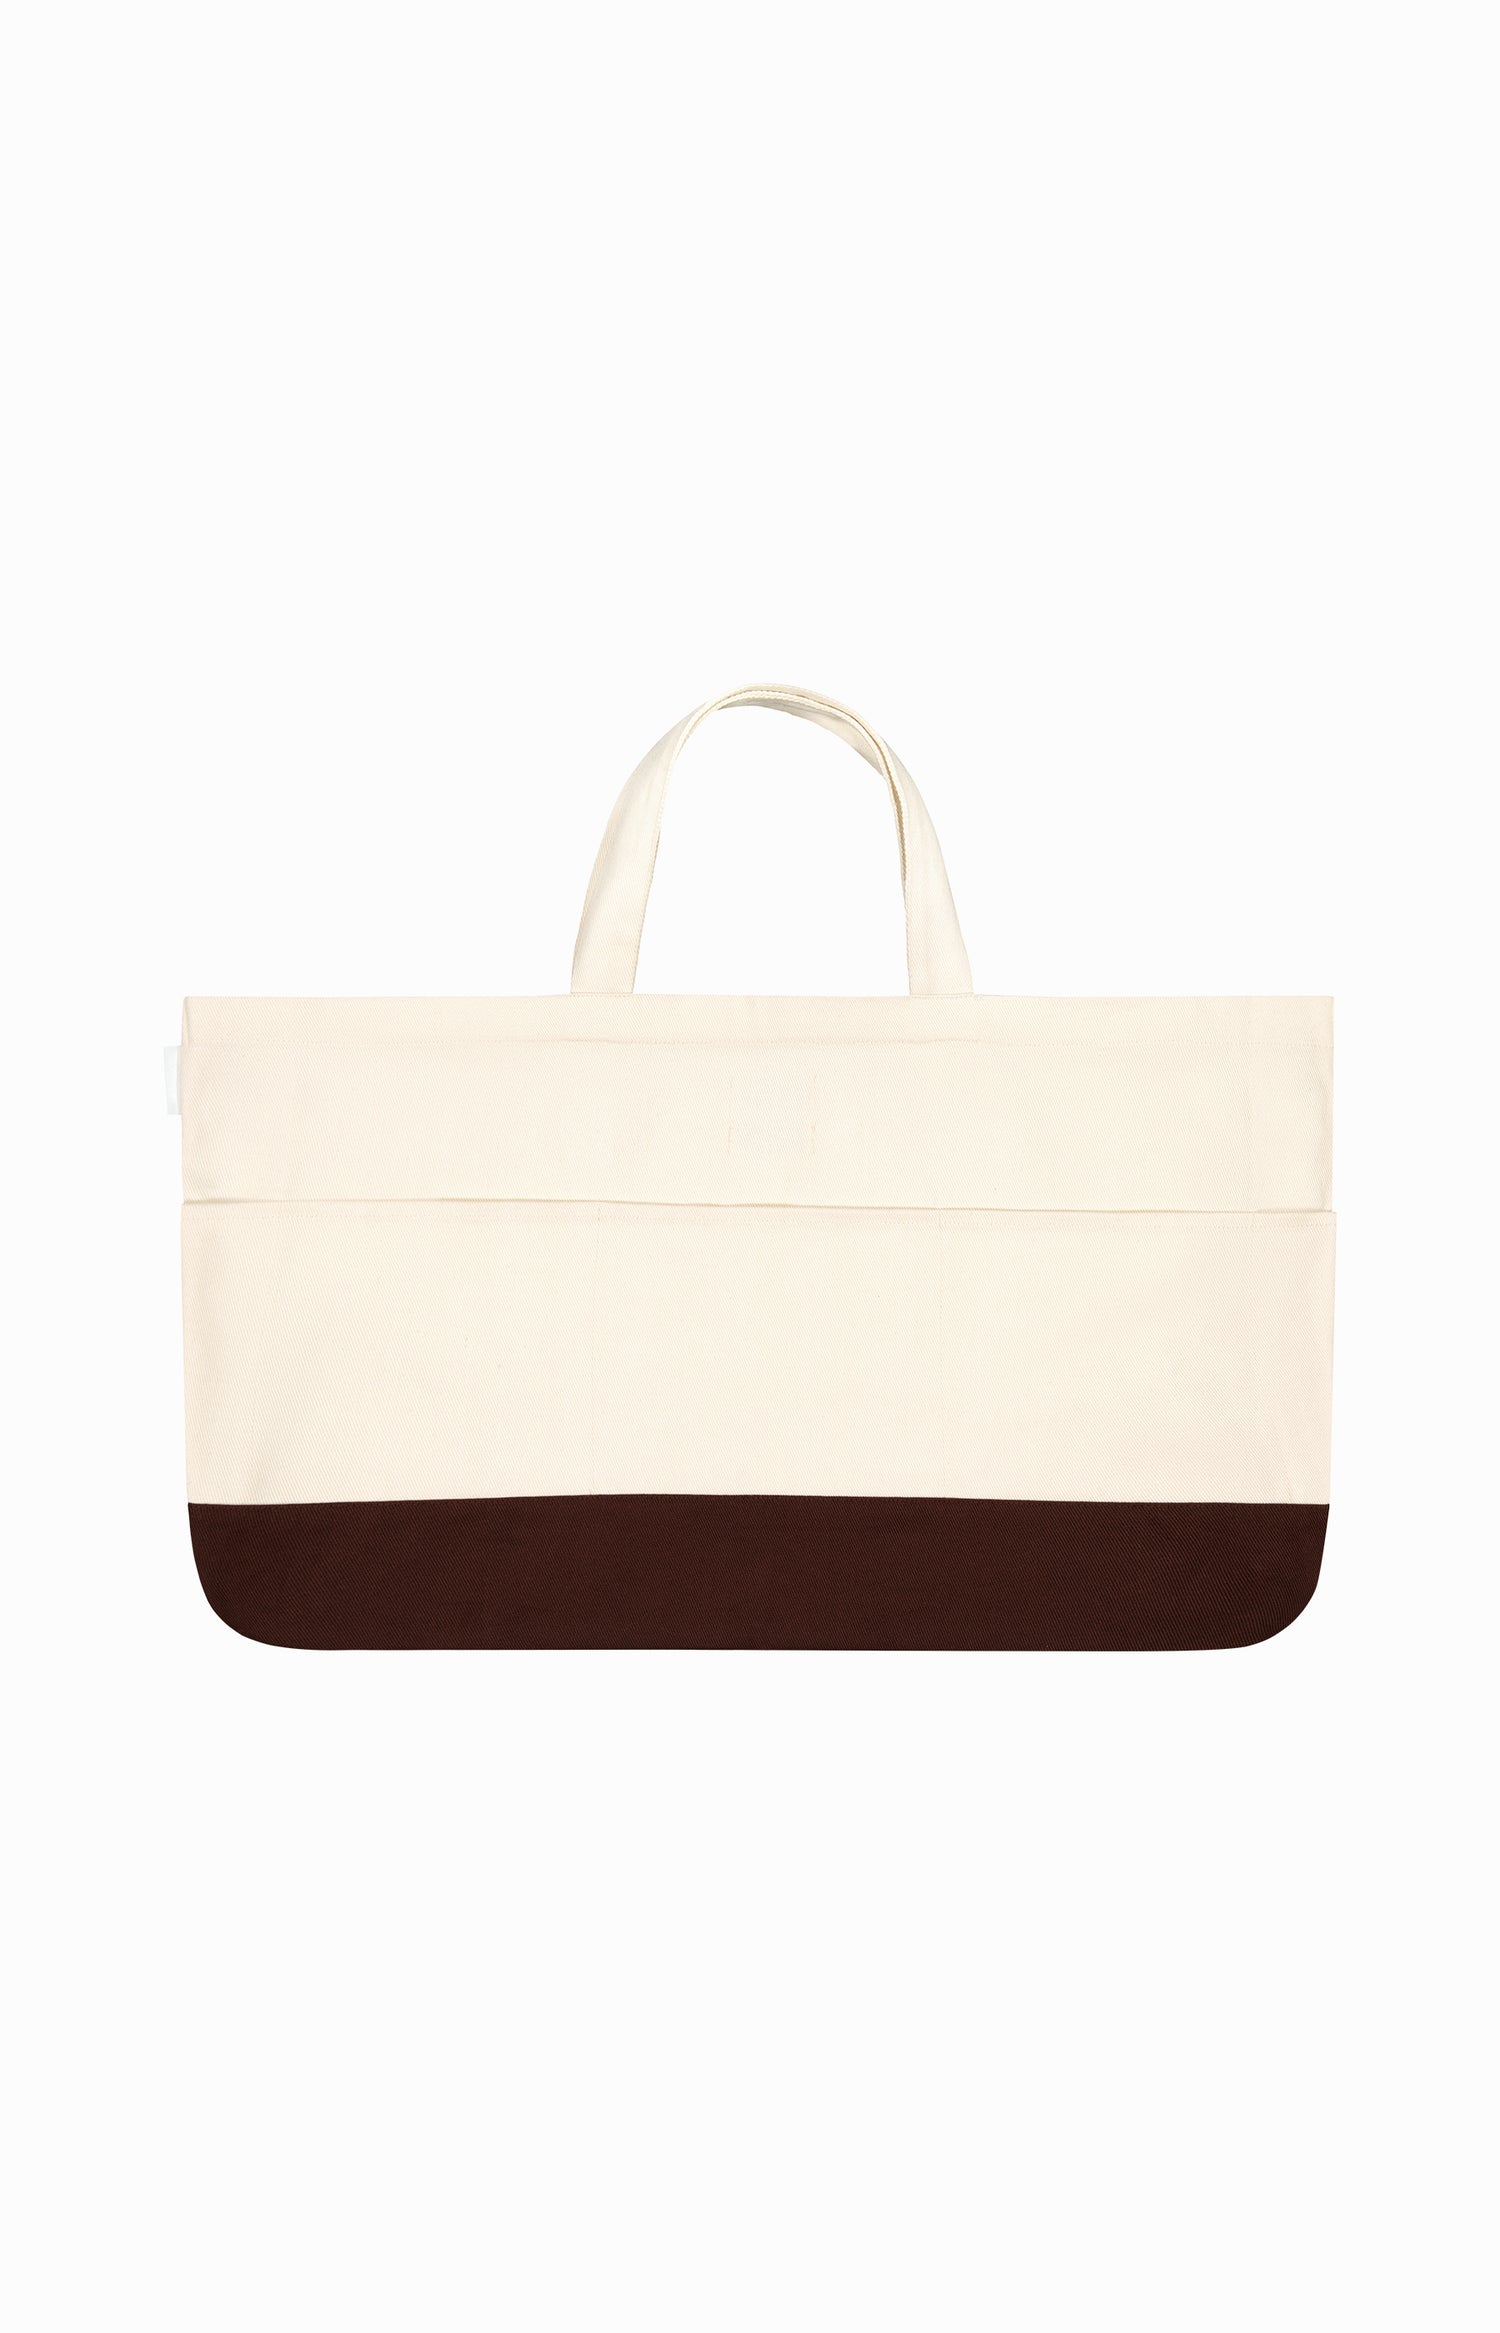 clear cut of beige and brown beach bag with a handle and pockets